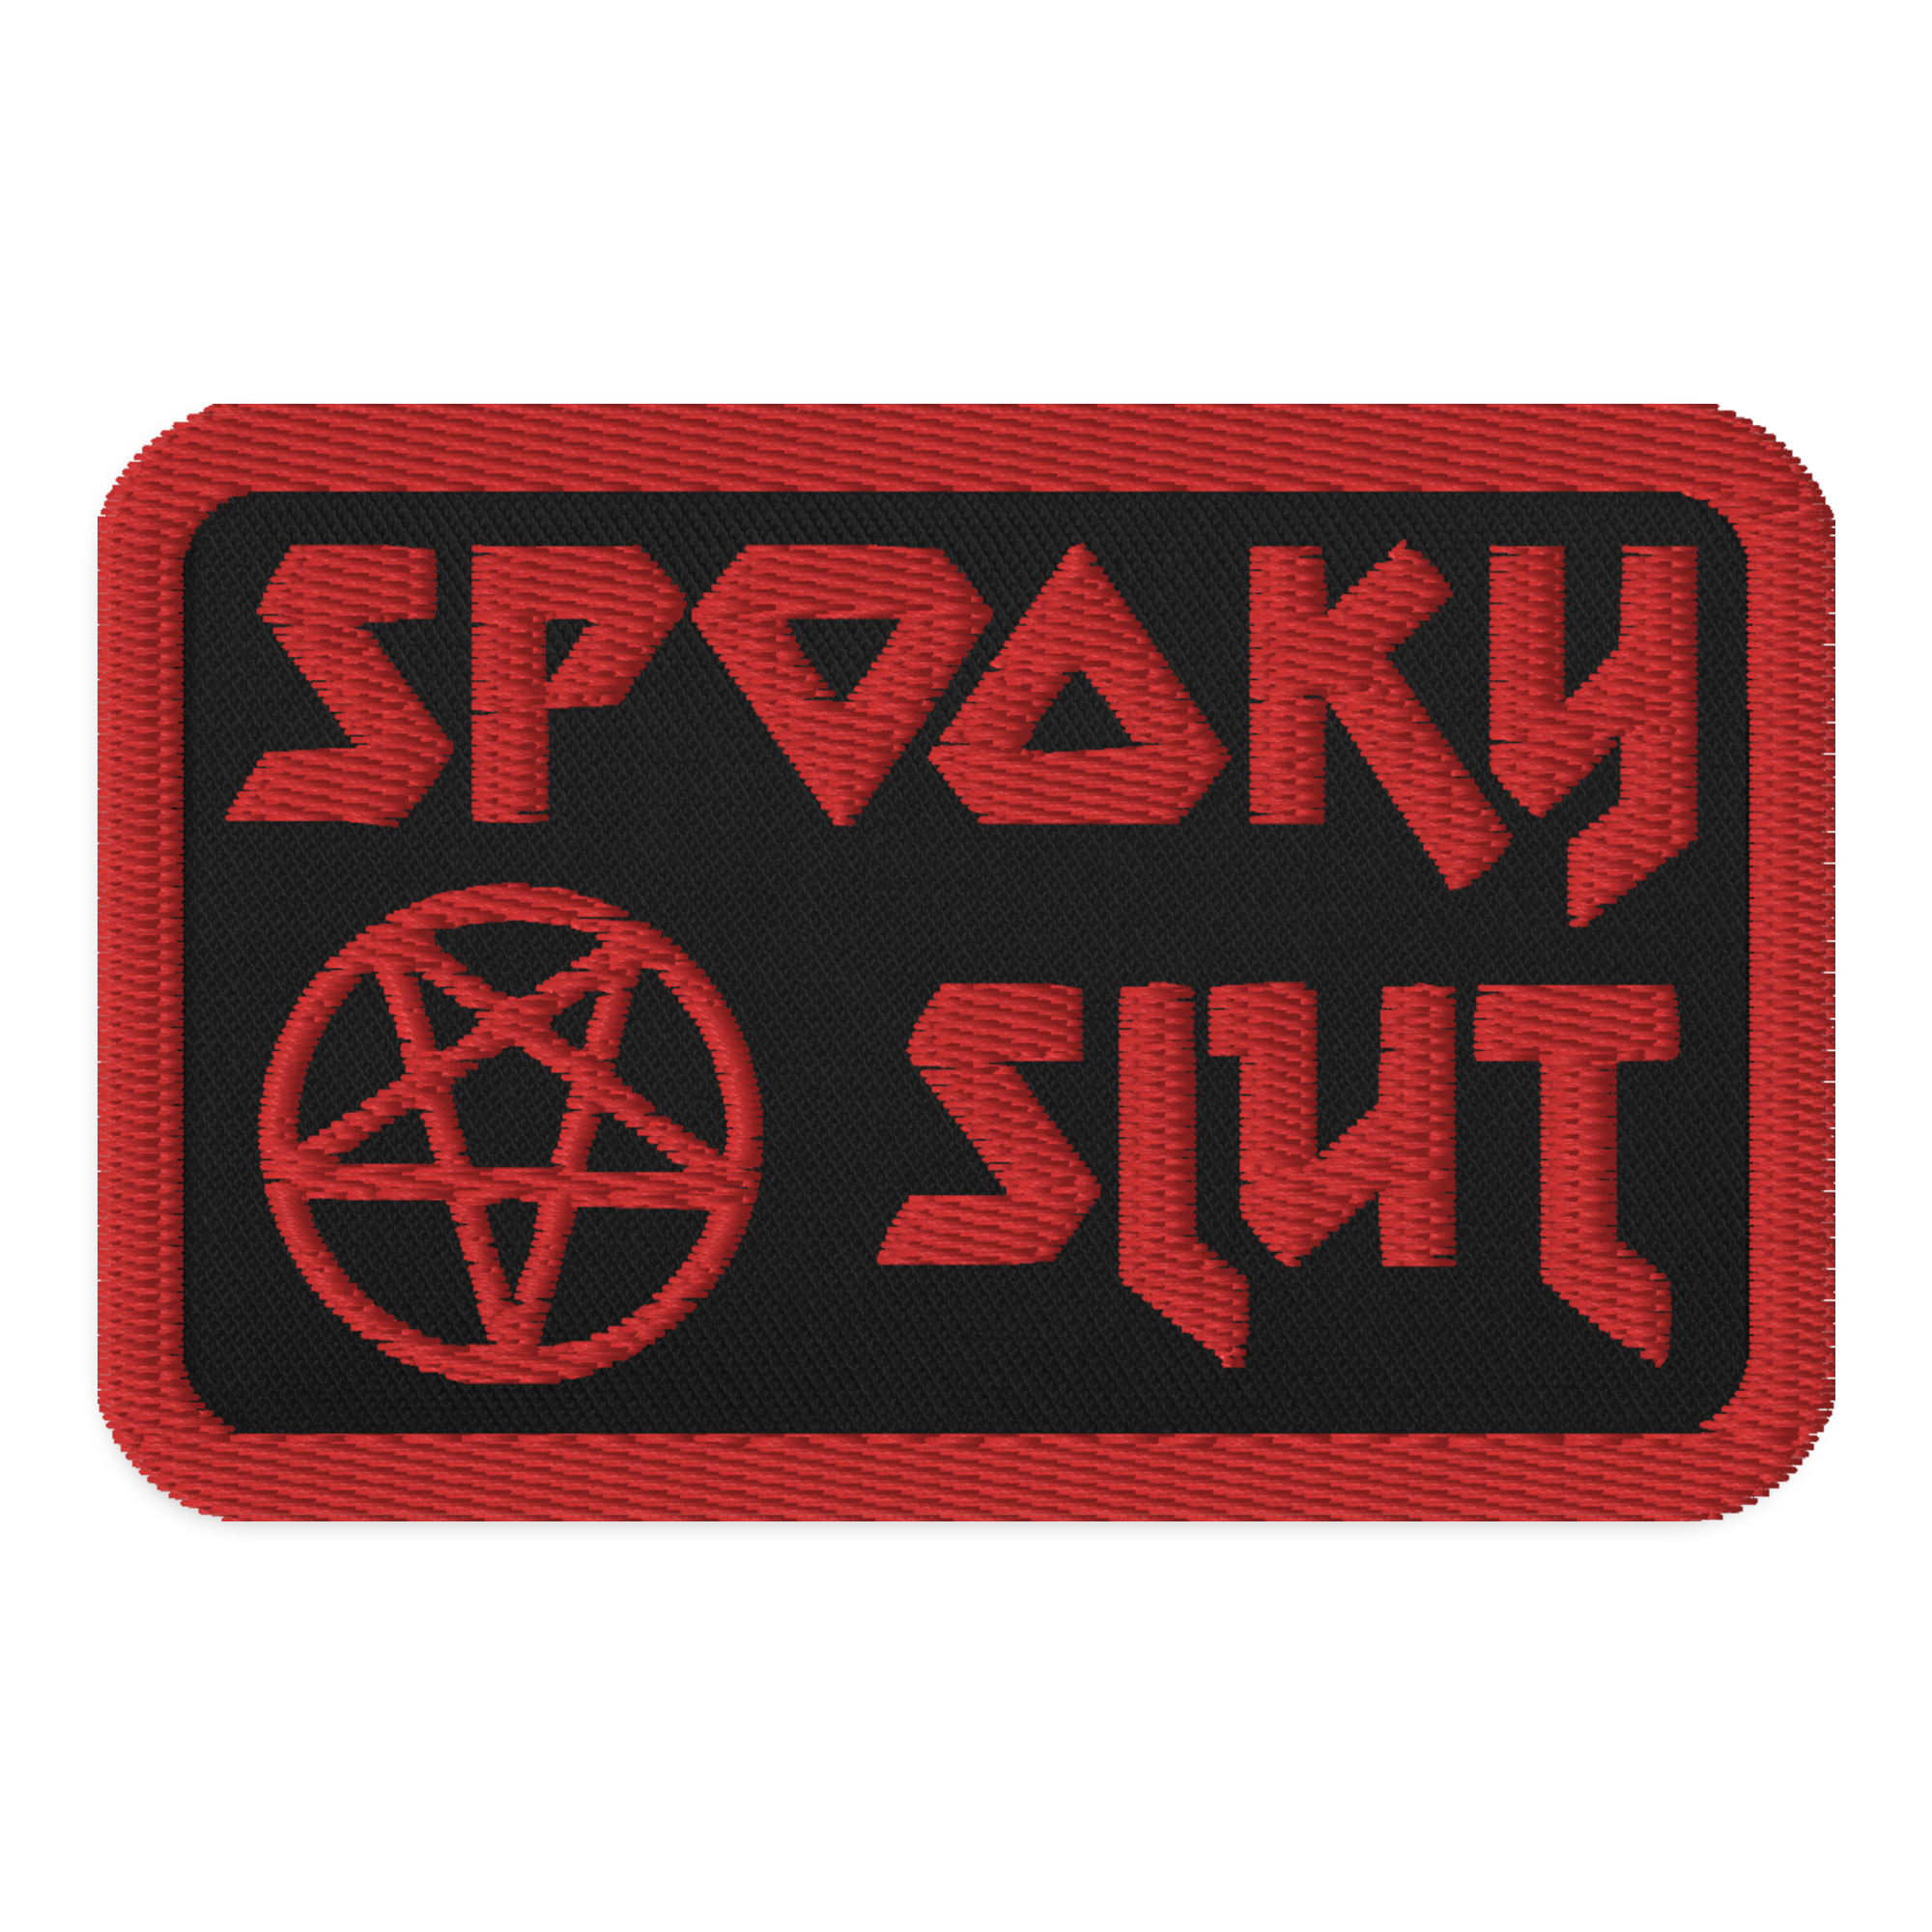 Featured image for “Spooky Slut - Embroidered patches”